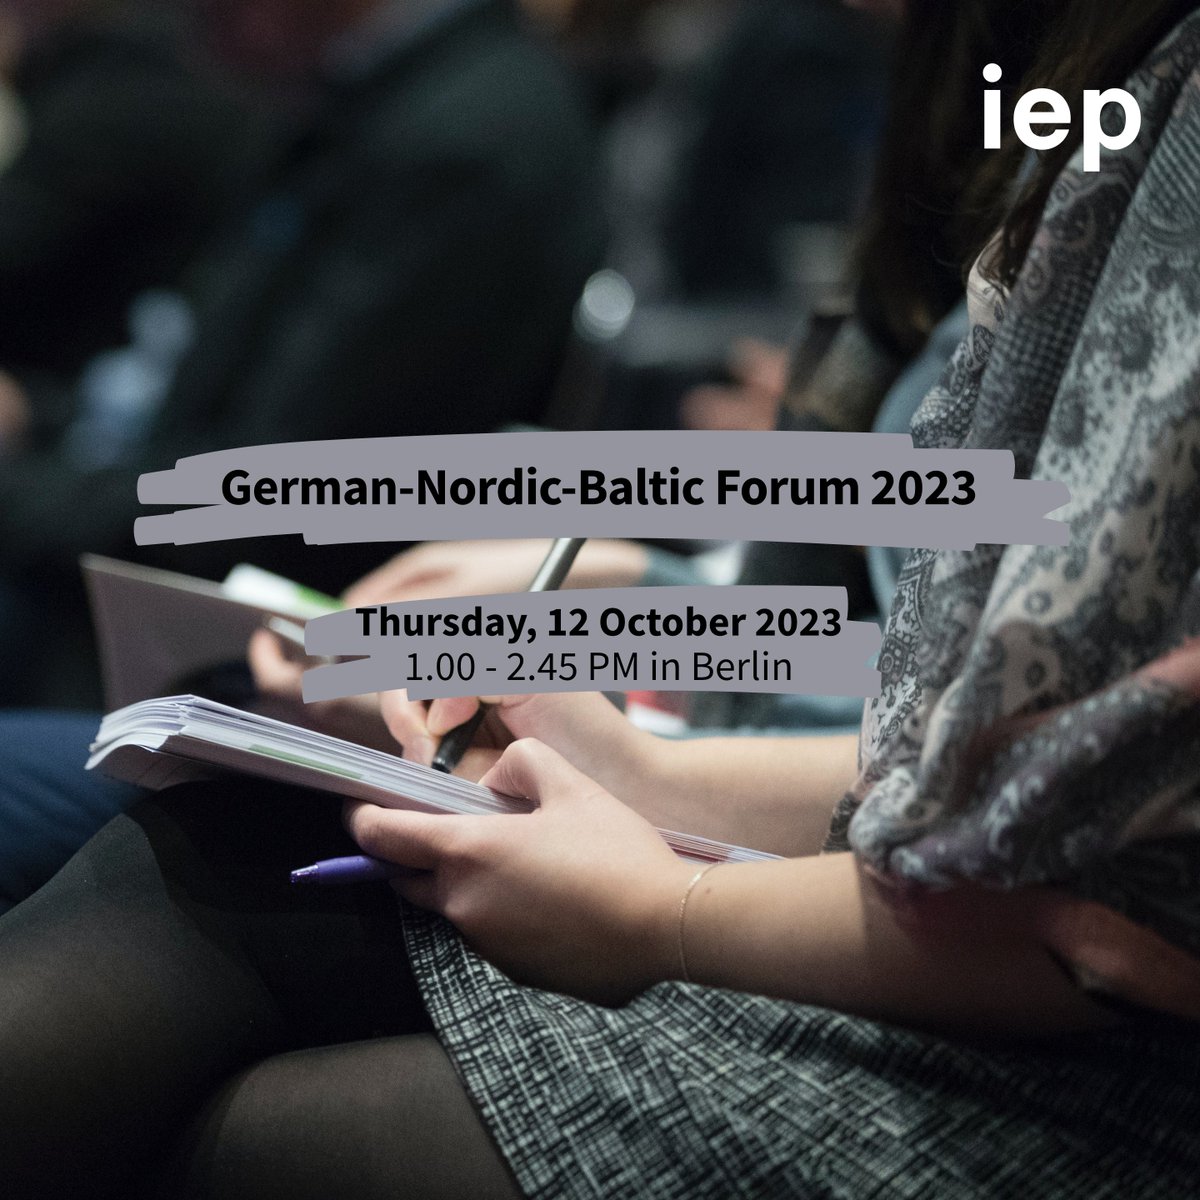 📣Join us tomorrow for the public opening of the 15th German-Nordic-Baltic Forum 🇩🇰🇪🇪🇫🇮🇩🇪🇱🇻🇱🇹🇸🇪 #GNBF2023 on #EuropeanResilience with a keynote by @GERonEurope Sibylle Katharina Sorg and comments from Estonian Ambassador @MLinntam Last call to register➡️ tinyurl.com/2watw2vx